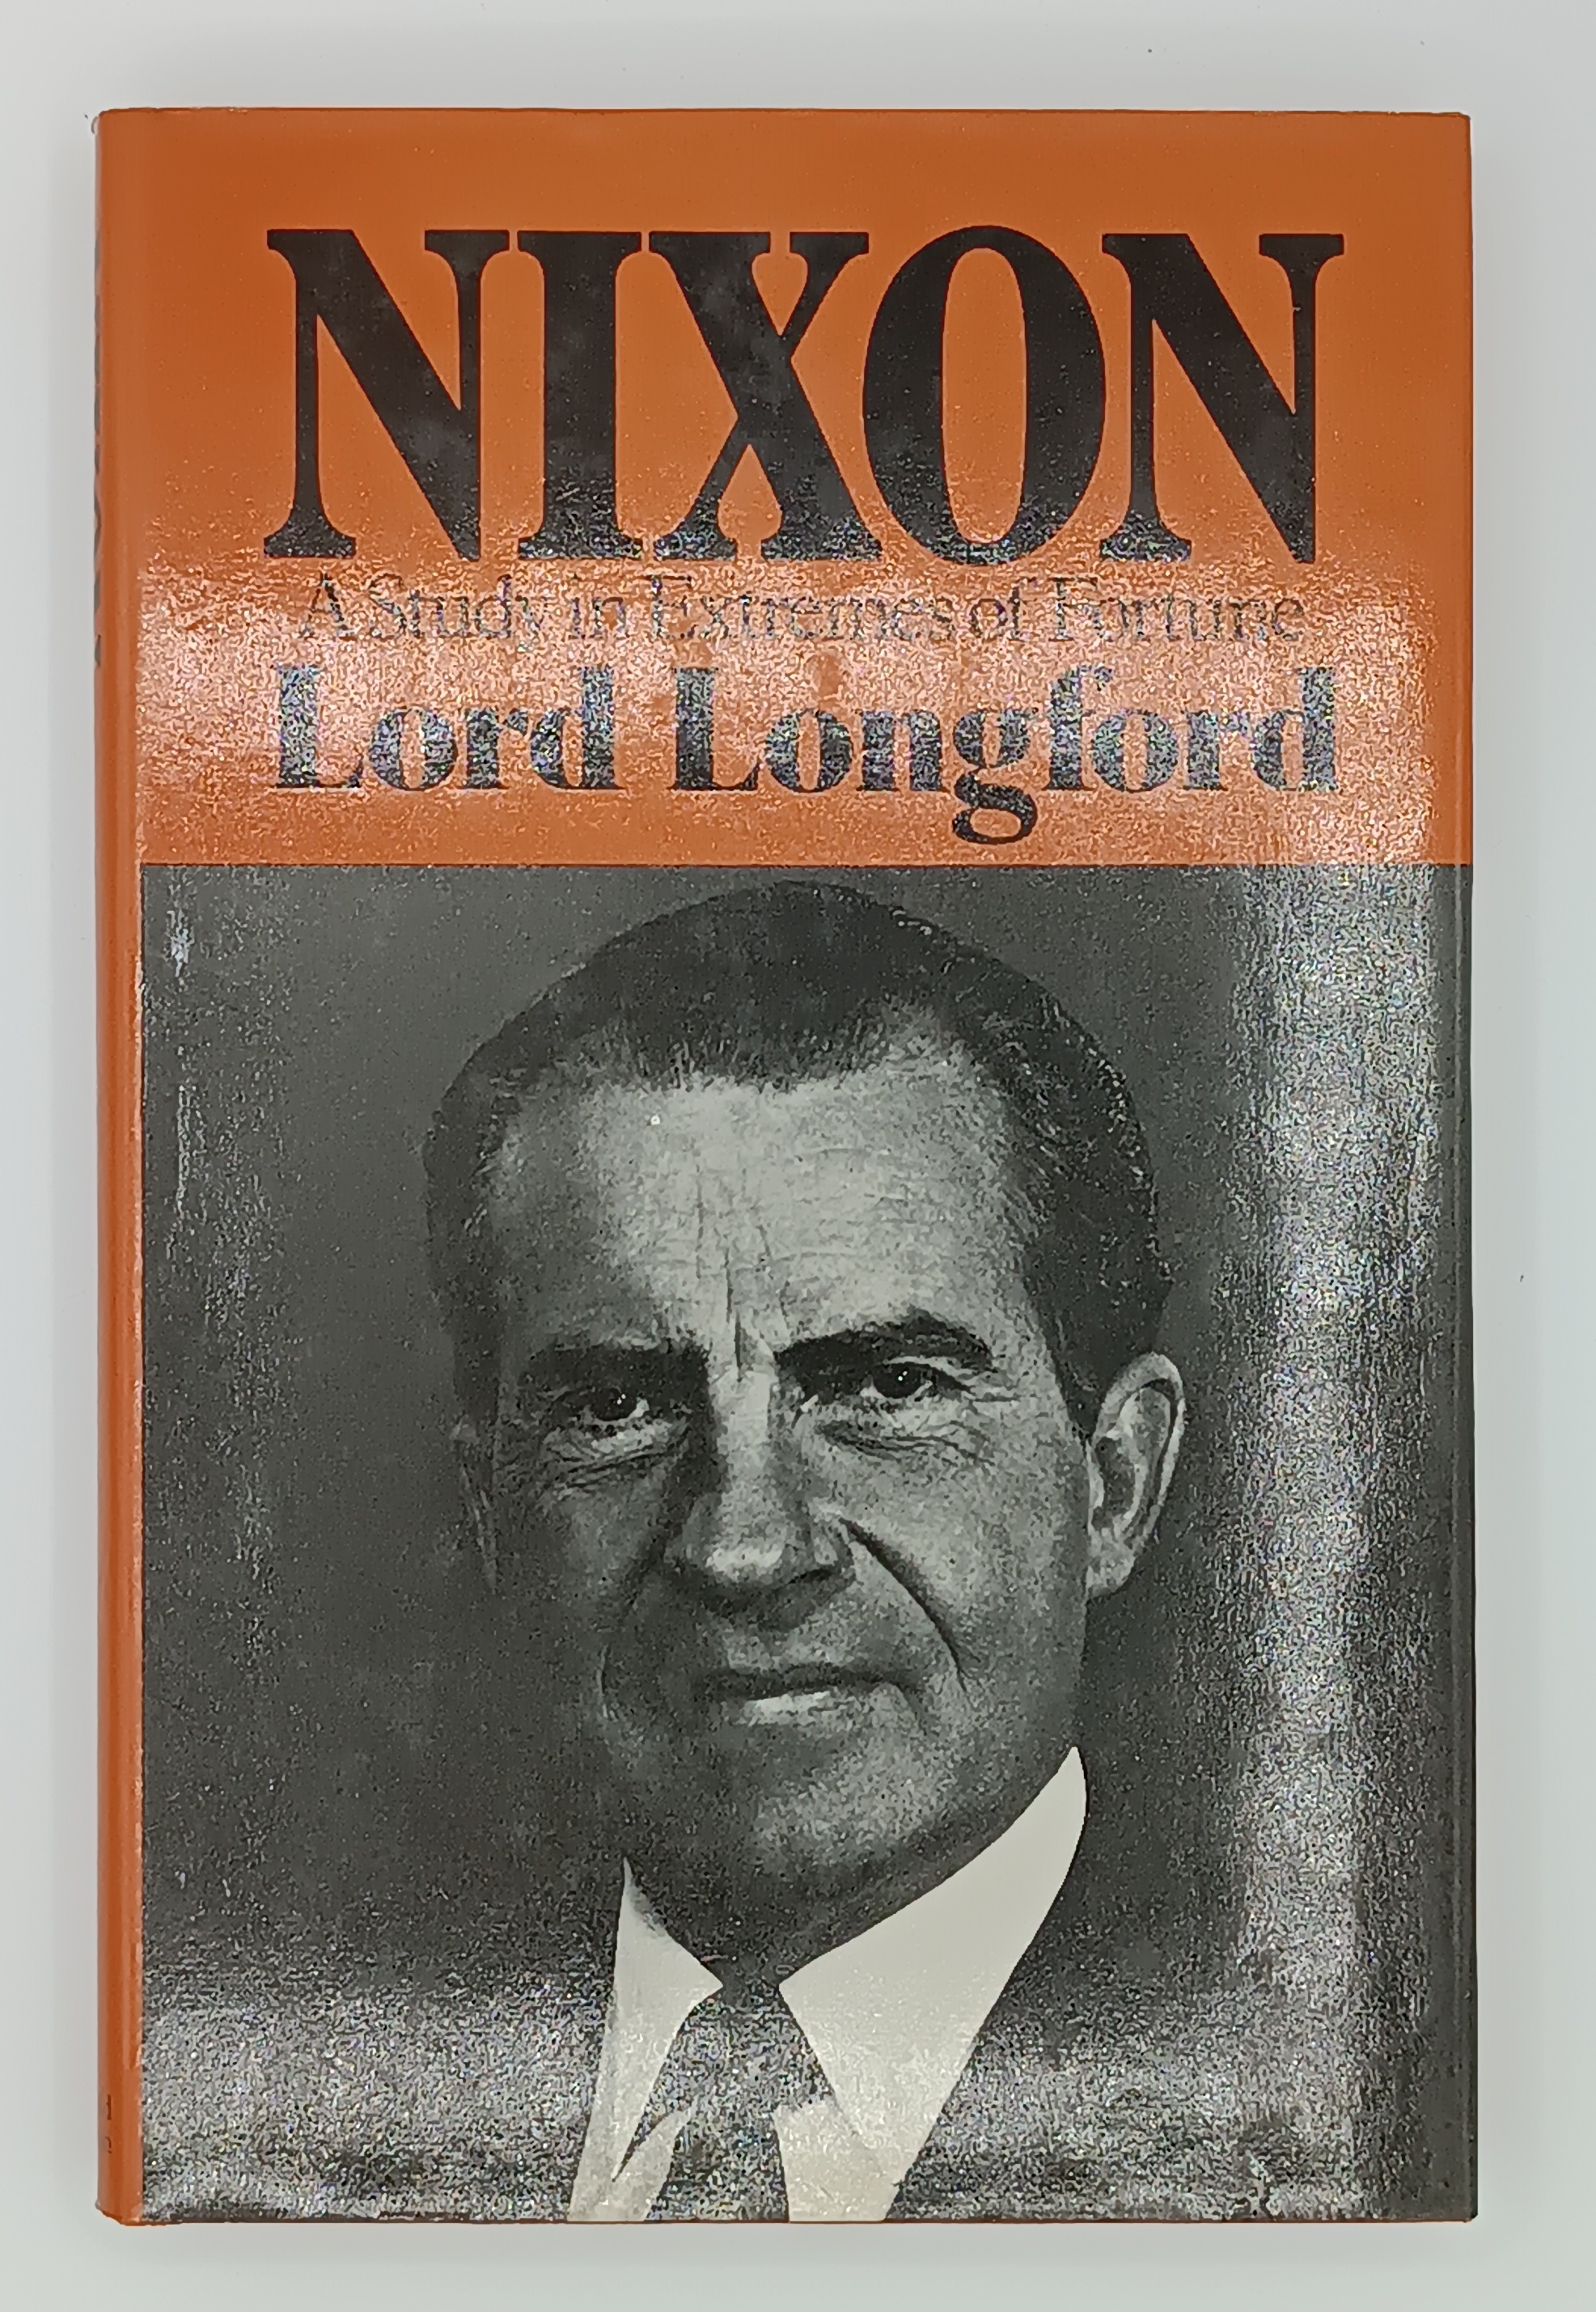 Nixon. A study in extremes of Fortune